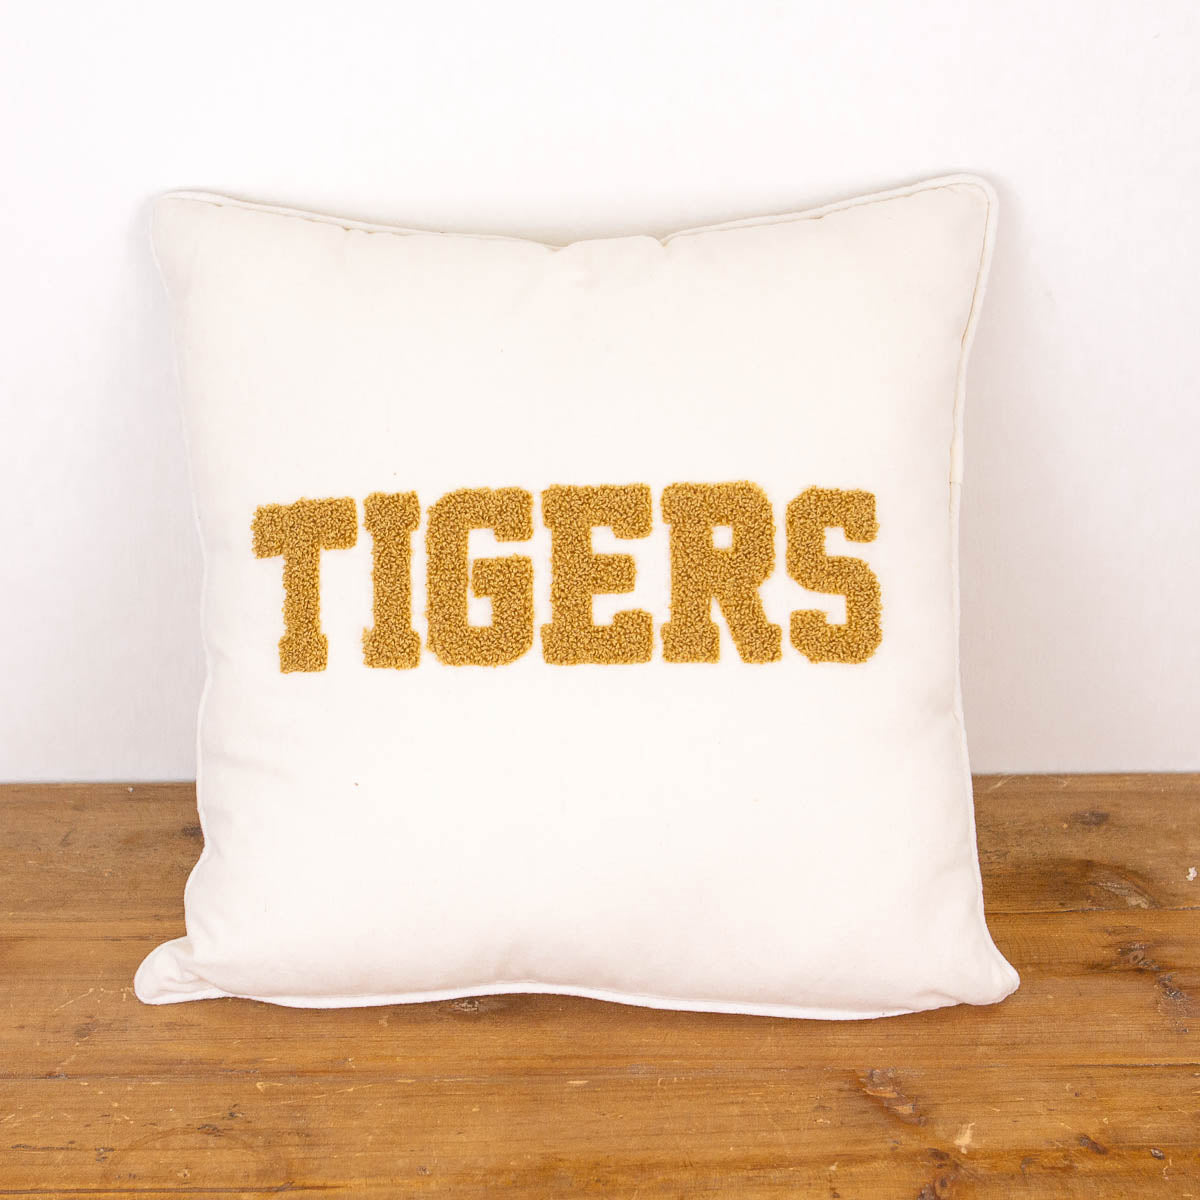 Tigers Embroidered Pillow